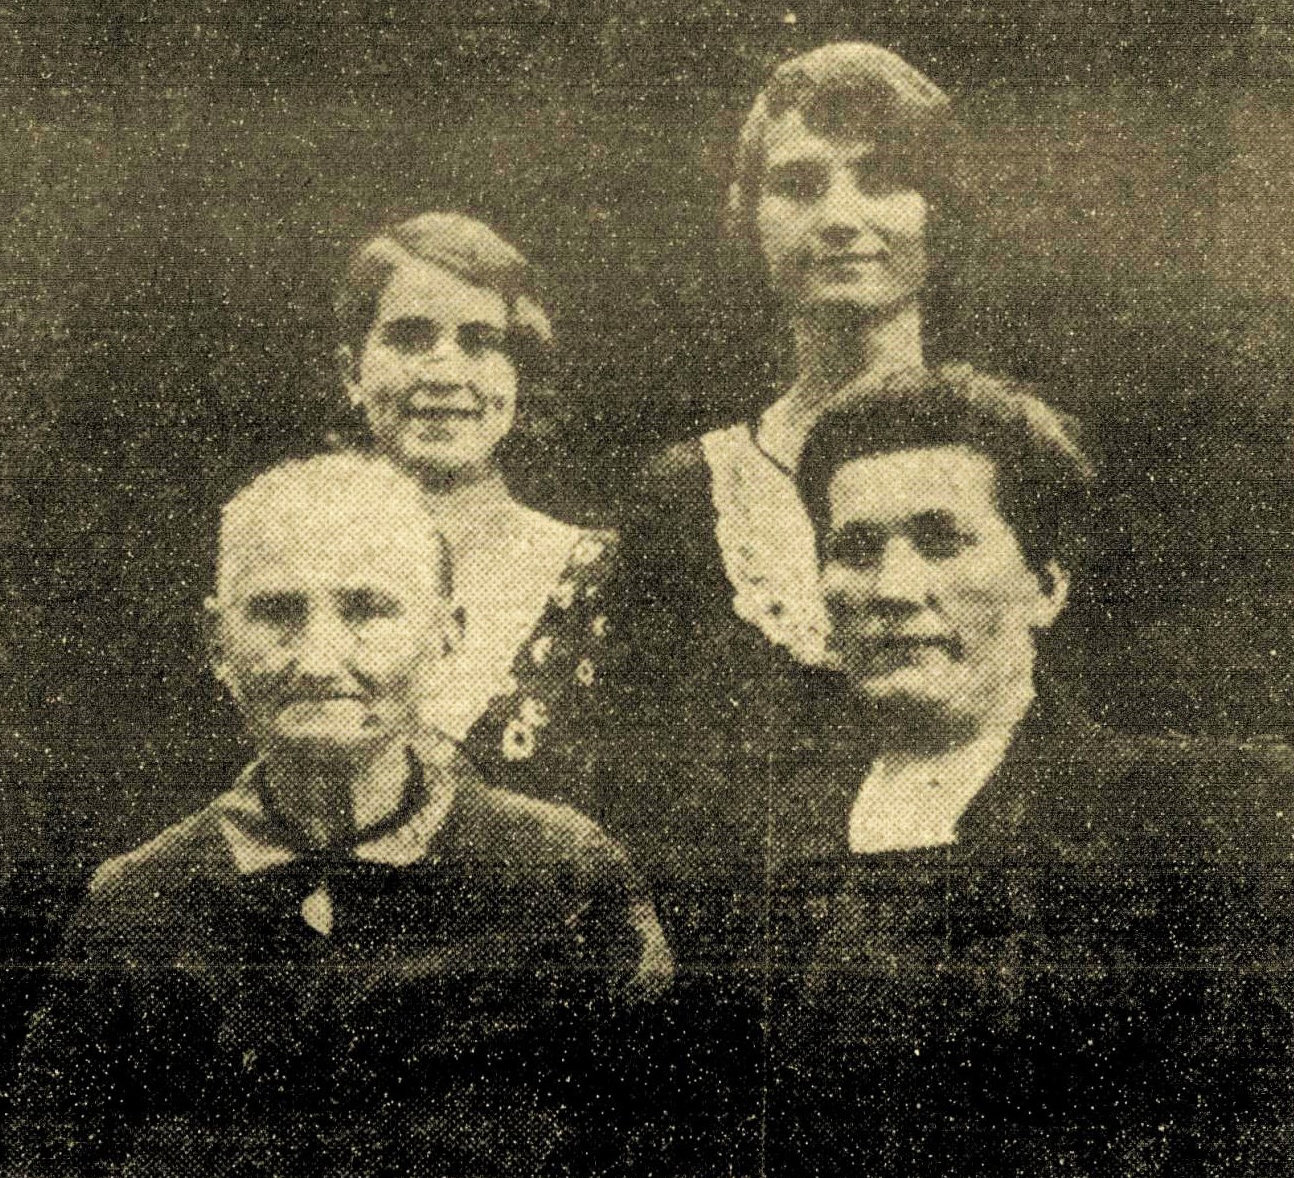 A Middletown Times Herald photo of Susanna Potsch and her family shortly after her nomination to run for Superintendent of the Poor in 1929. Susanna is bottom right. Her mother, Susanna Schwatz, is next to her and her two daughters are behind them.